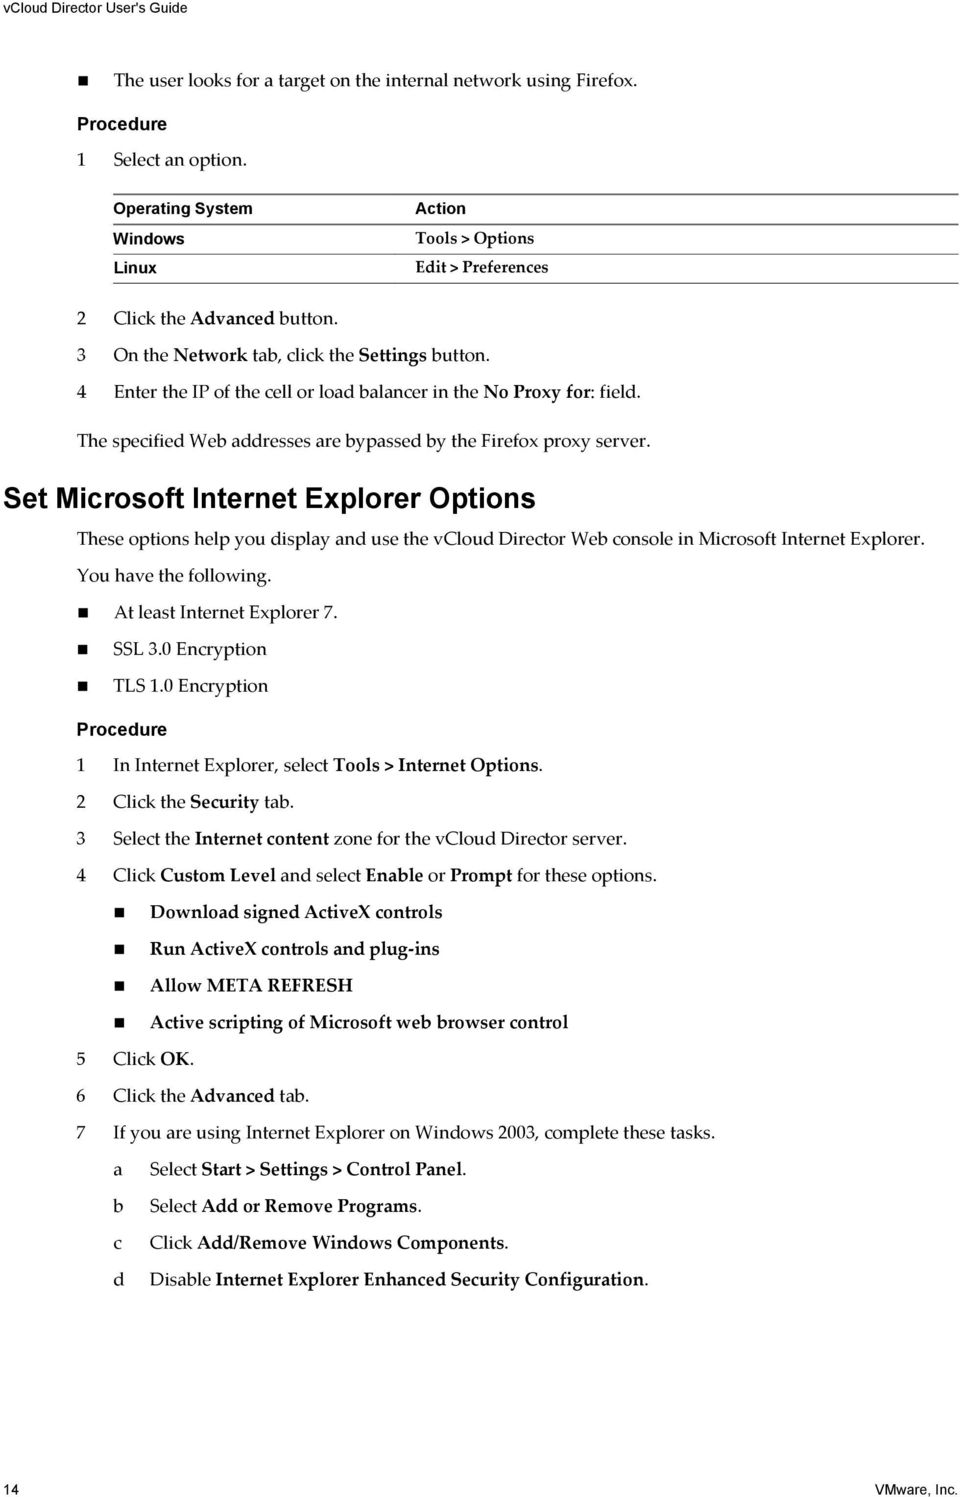 Set Microsoft Internet Explorer Options These options help you display and use the vcloud Director Web console in Microsoft Internet Explorer. You have the following. At least Internet Explorer 7.